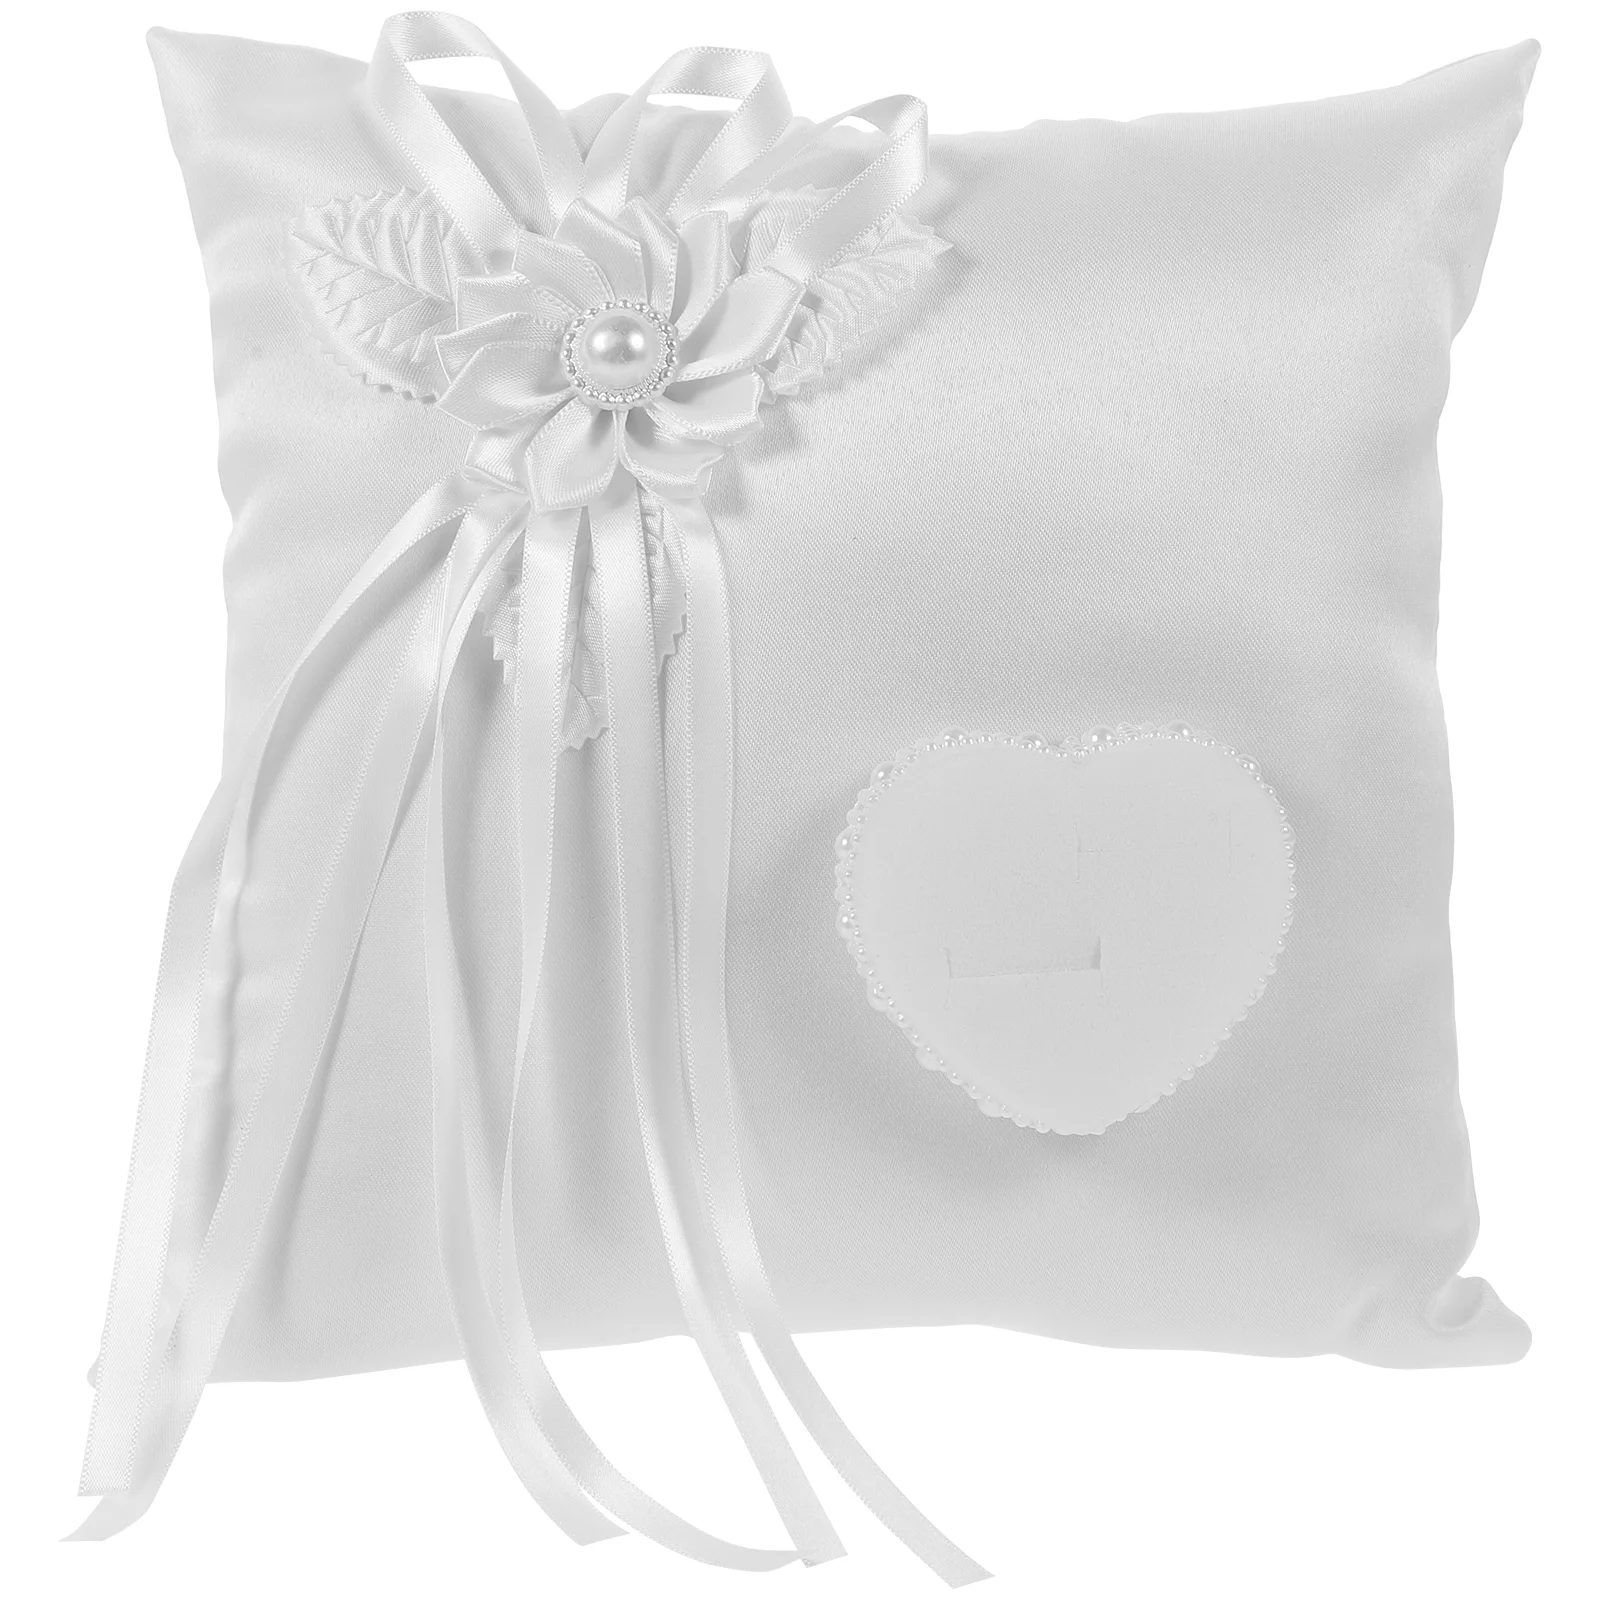 

Ring Pillow Wedding Bearer Cushion Holder Lace Bridal Pillows Box Flower Ceremony White Satin Marriage Pearl Engagement Jewelry